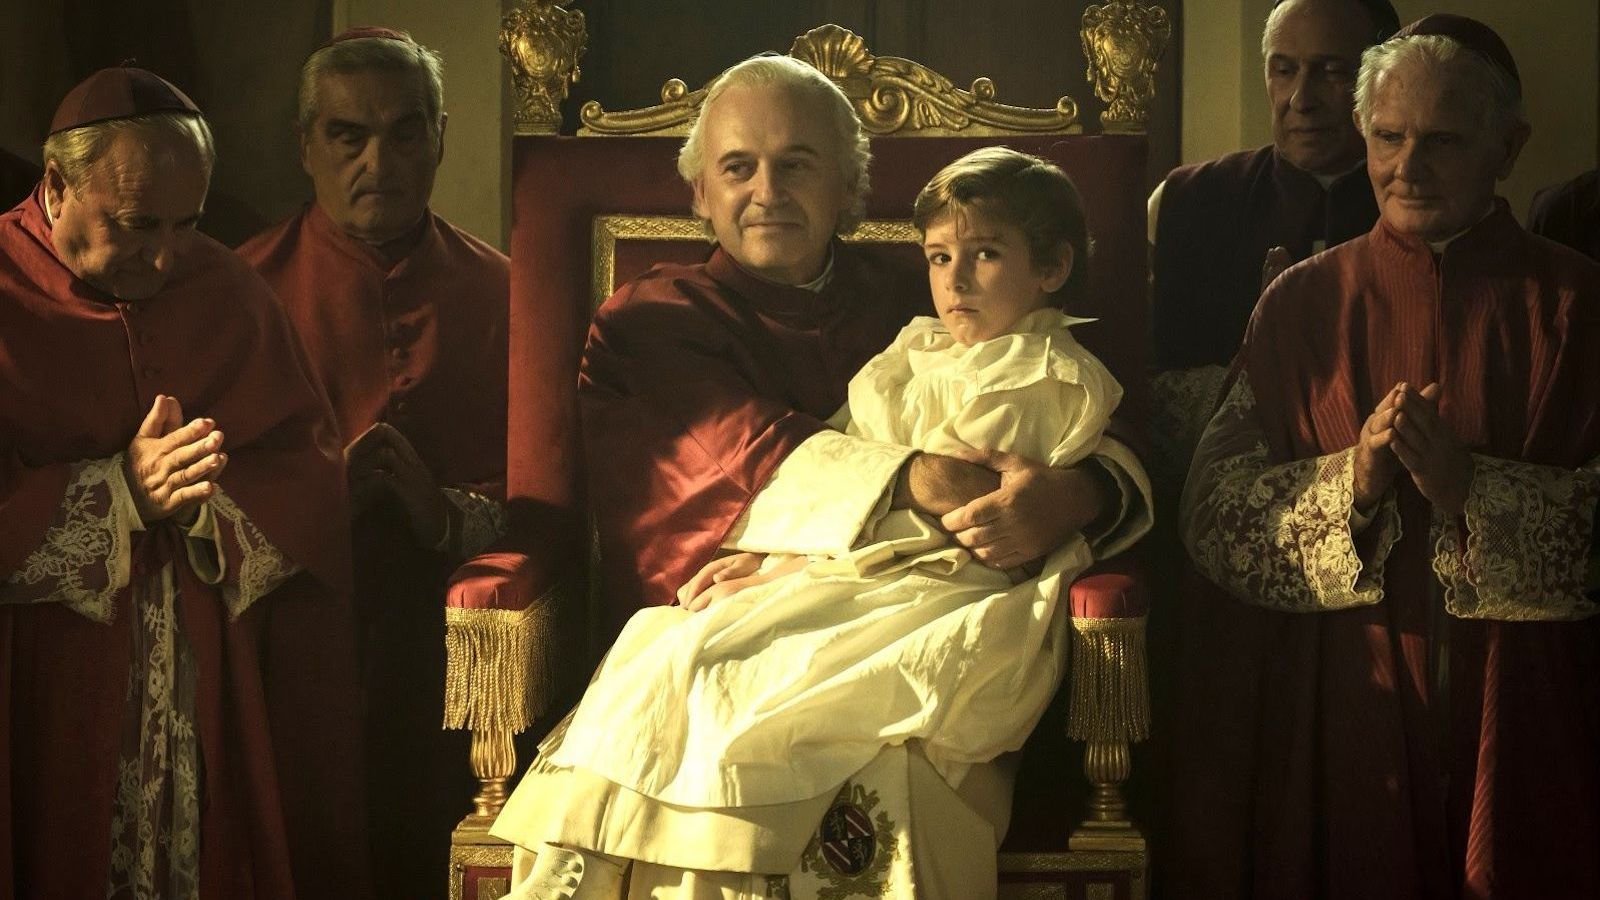 Kidnapped, in the name of the Pope King: faith and power according to Marco Bellocchio